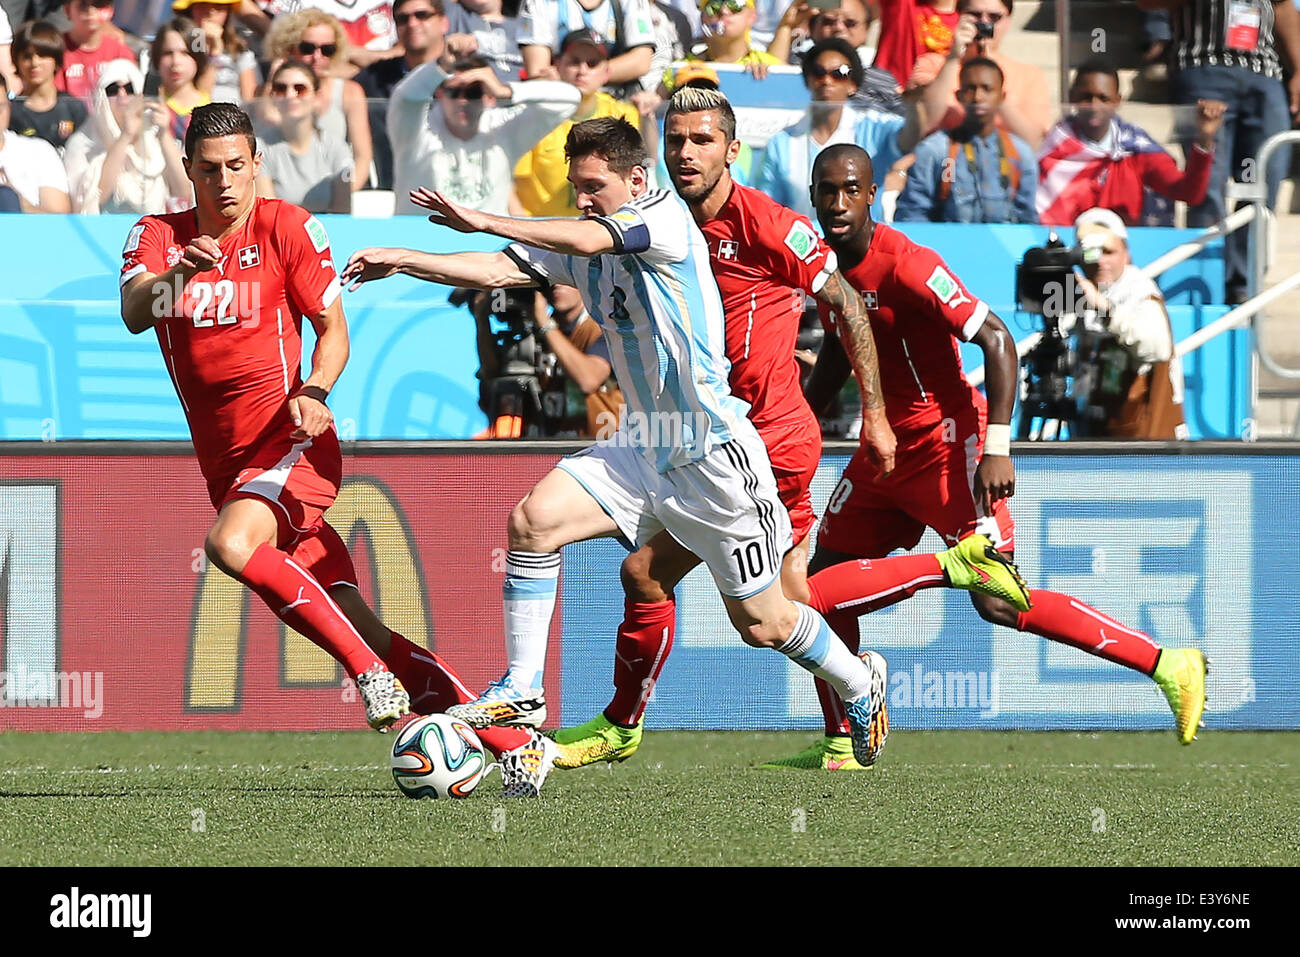 Sao Paulo, Brazil. 1st July, 2014. Argentina's Lionel Messi (2nd L) vies with Switzerland's Fabian Schaer (1st L) during a Round of 16 match between Argentina and Switzerland of 2014 FIFA World Cup at the Arena de Sao Paulo Stadium in Sao Paulo, Brazil, on July 1, 2014. Credit:  Xu Zijian/Xinhua/Alamy Live News Stock Photo